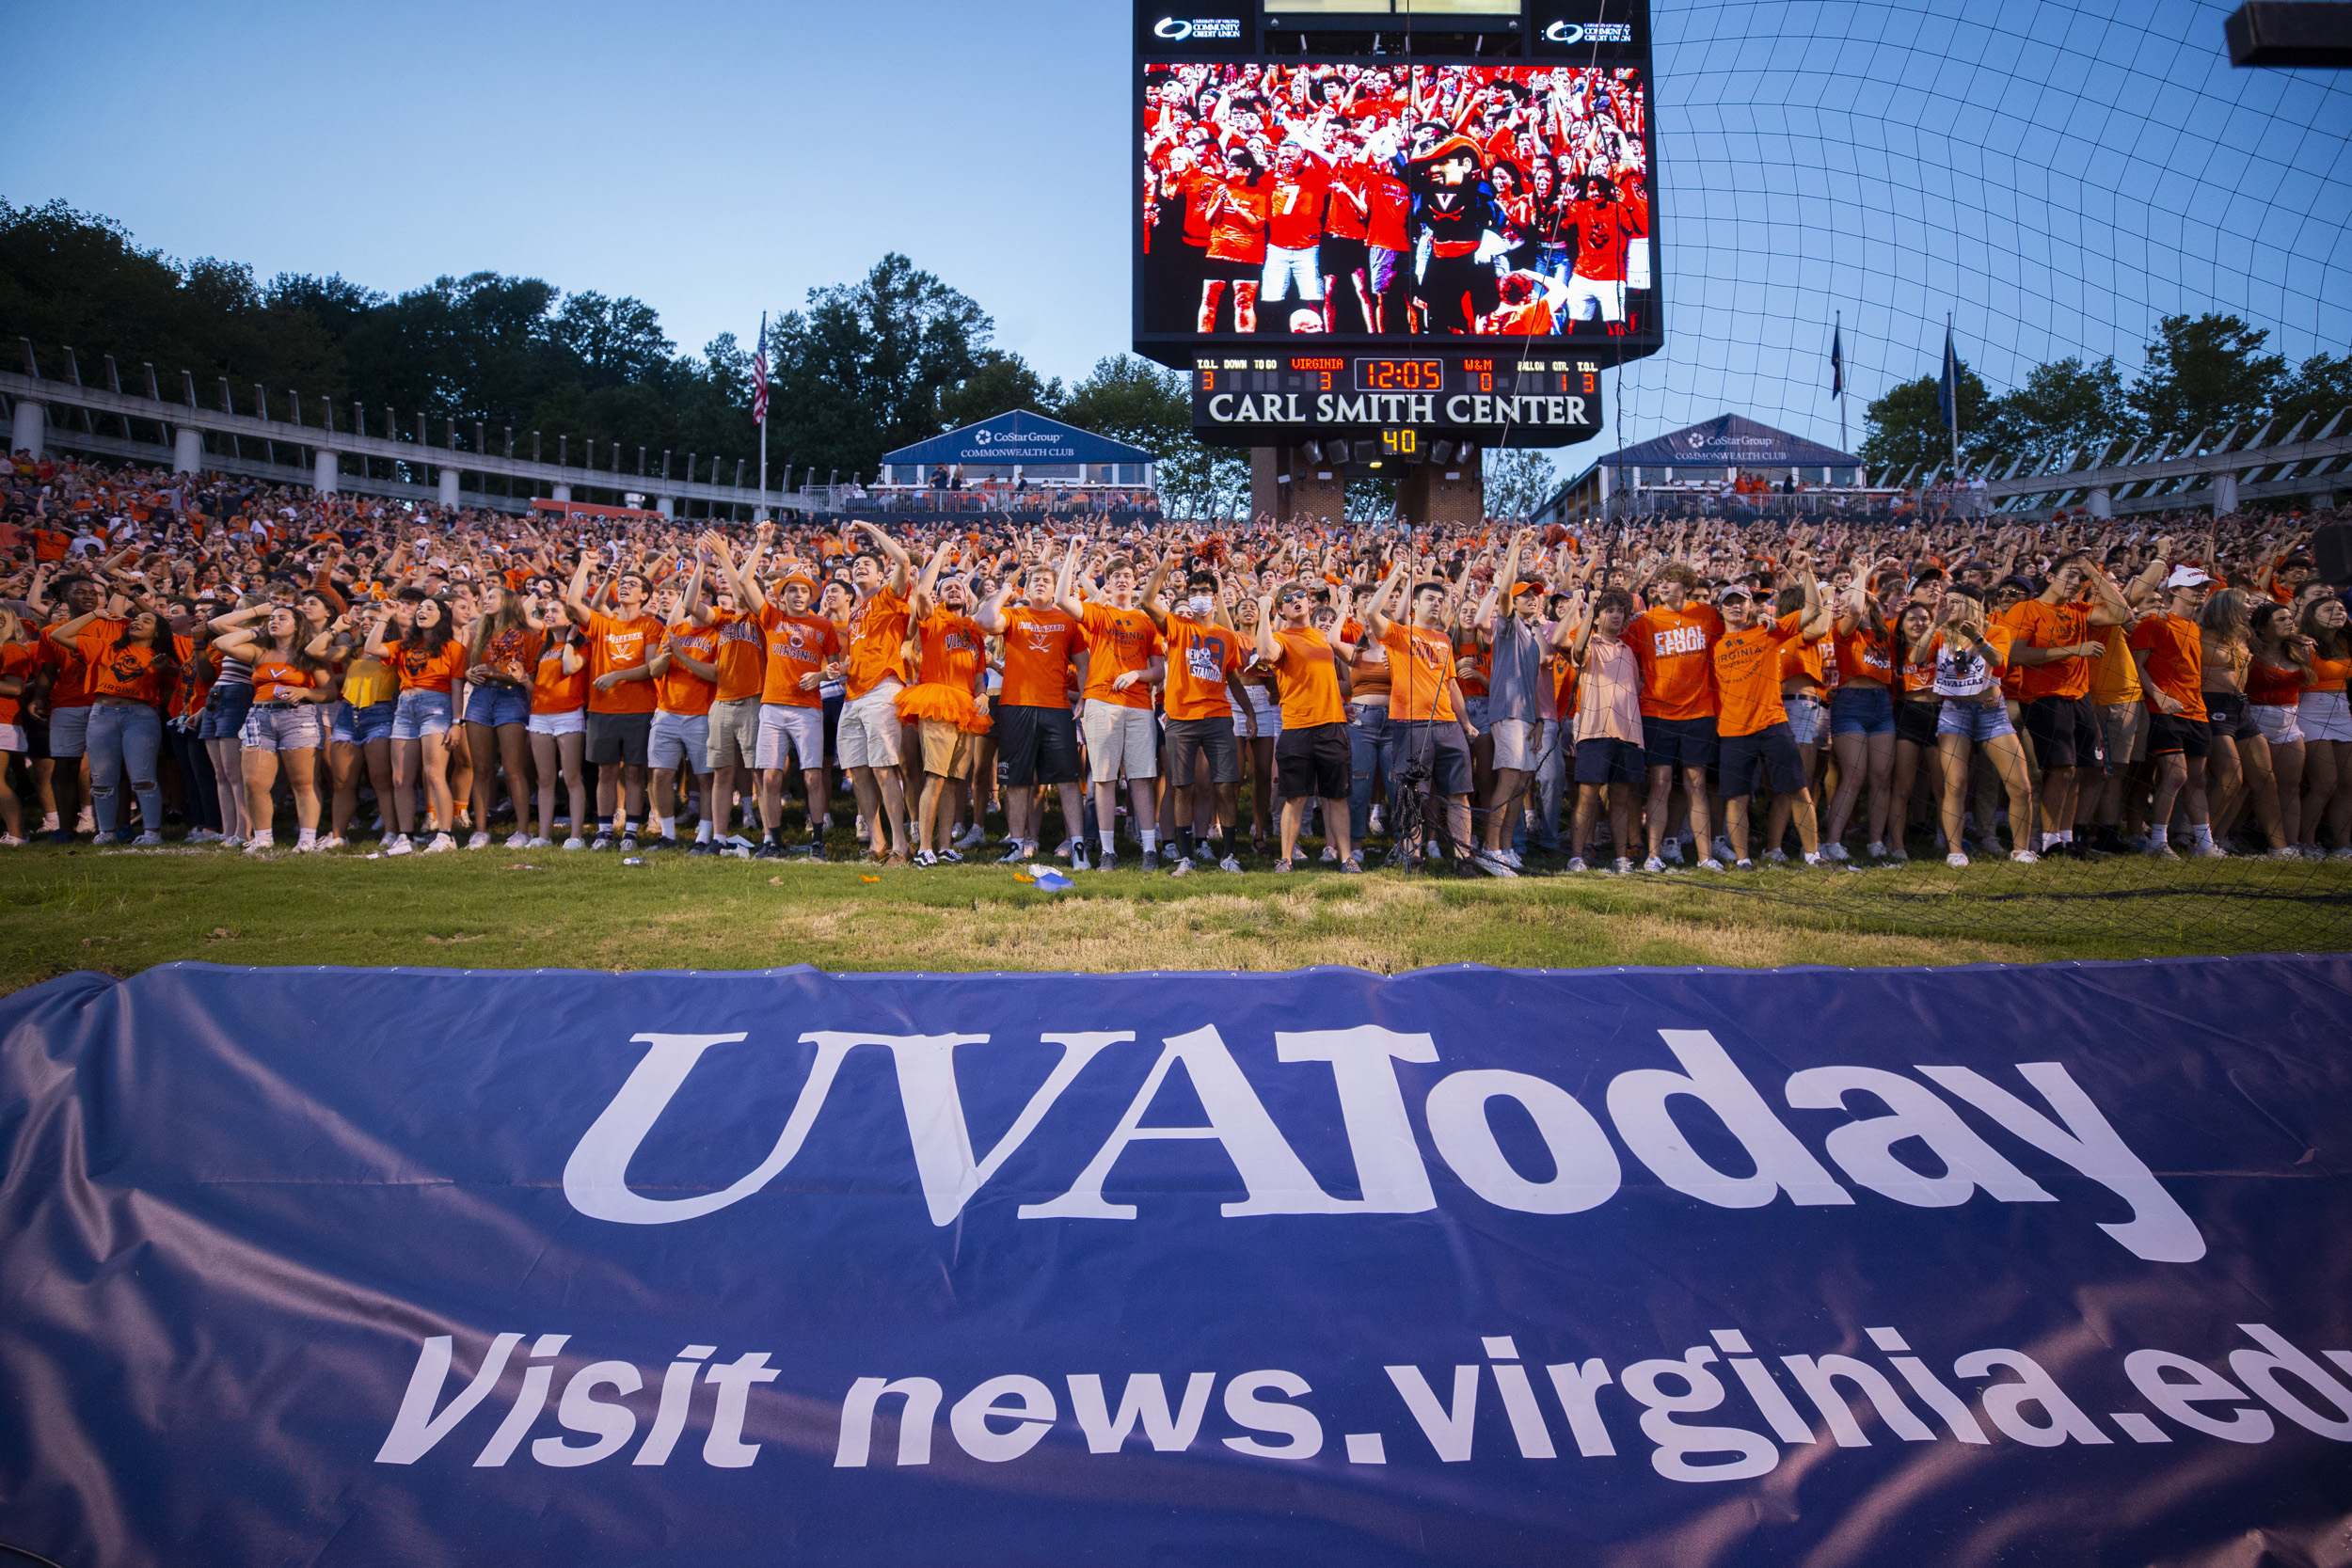 Crowd on the Scott Stadium field for a photo with the sign UVA  TODAY visit news.virginia.edu in front of them